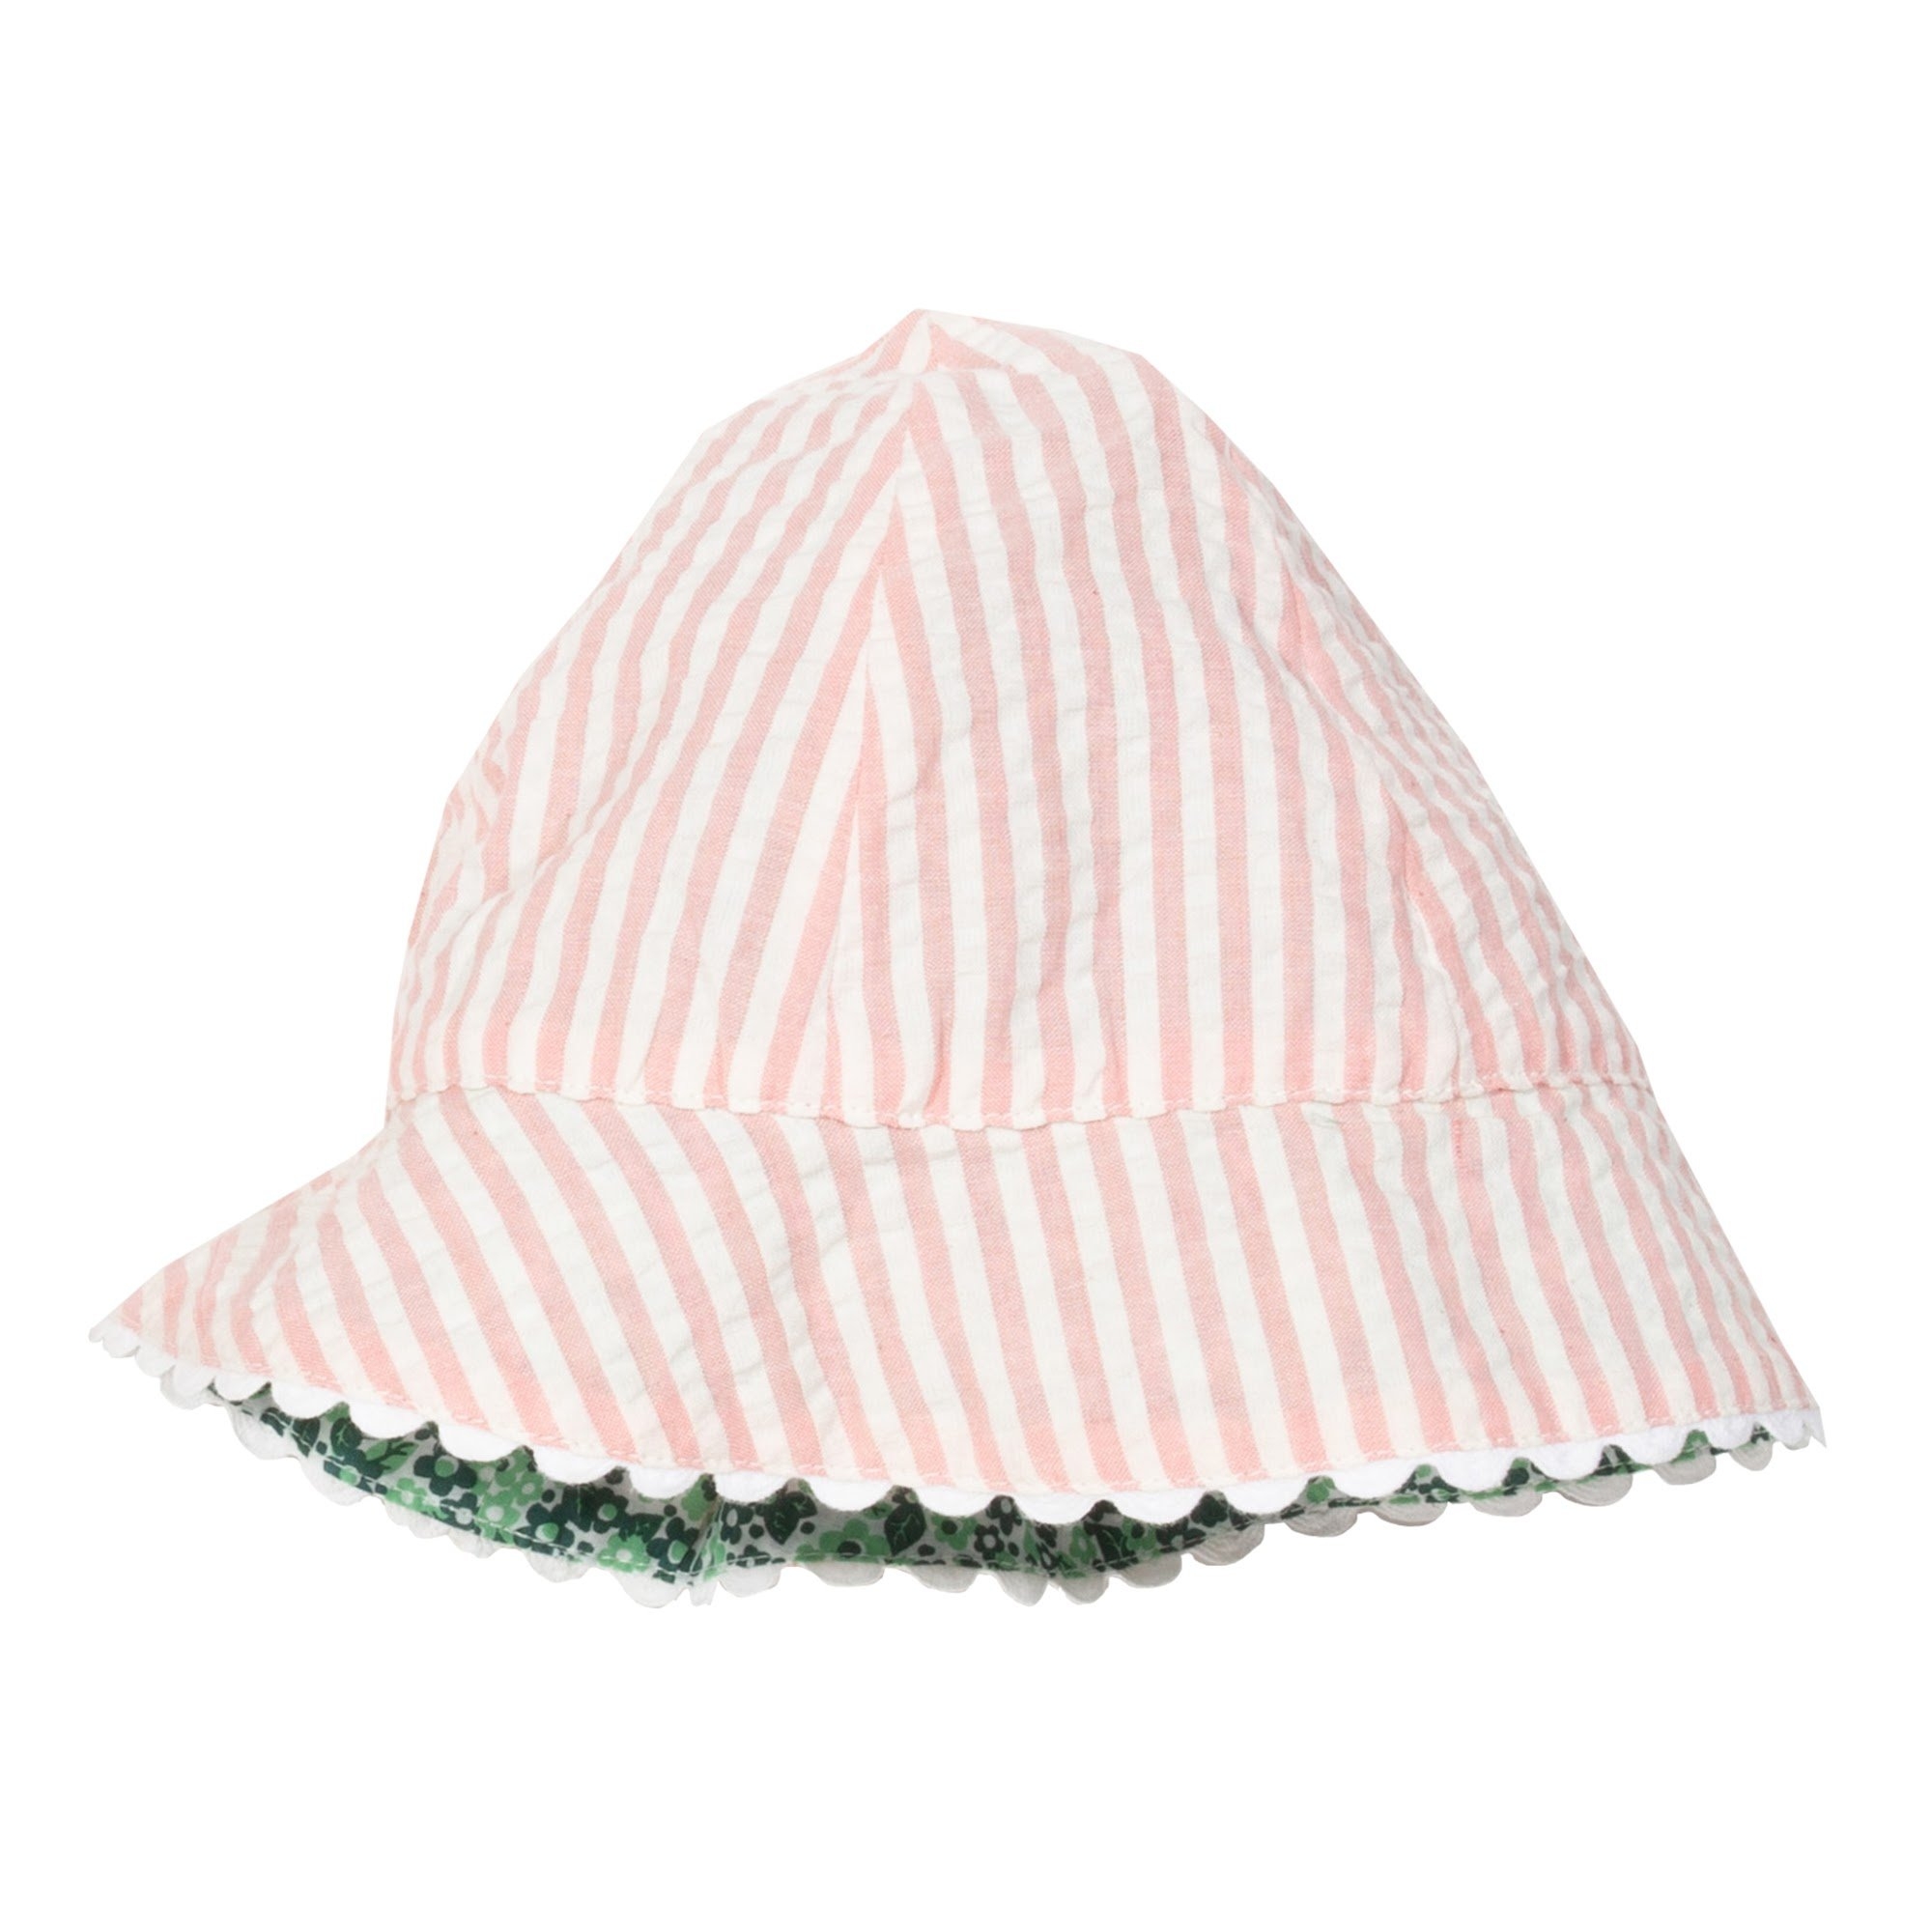 Kite Toddler Blossom Reversible Sun Hat Organic Cotton – Pink and Green – 3-6 years